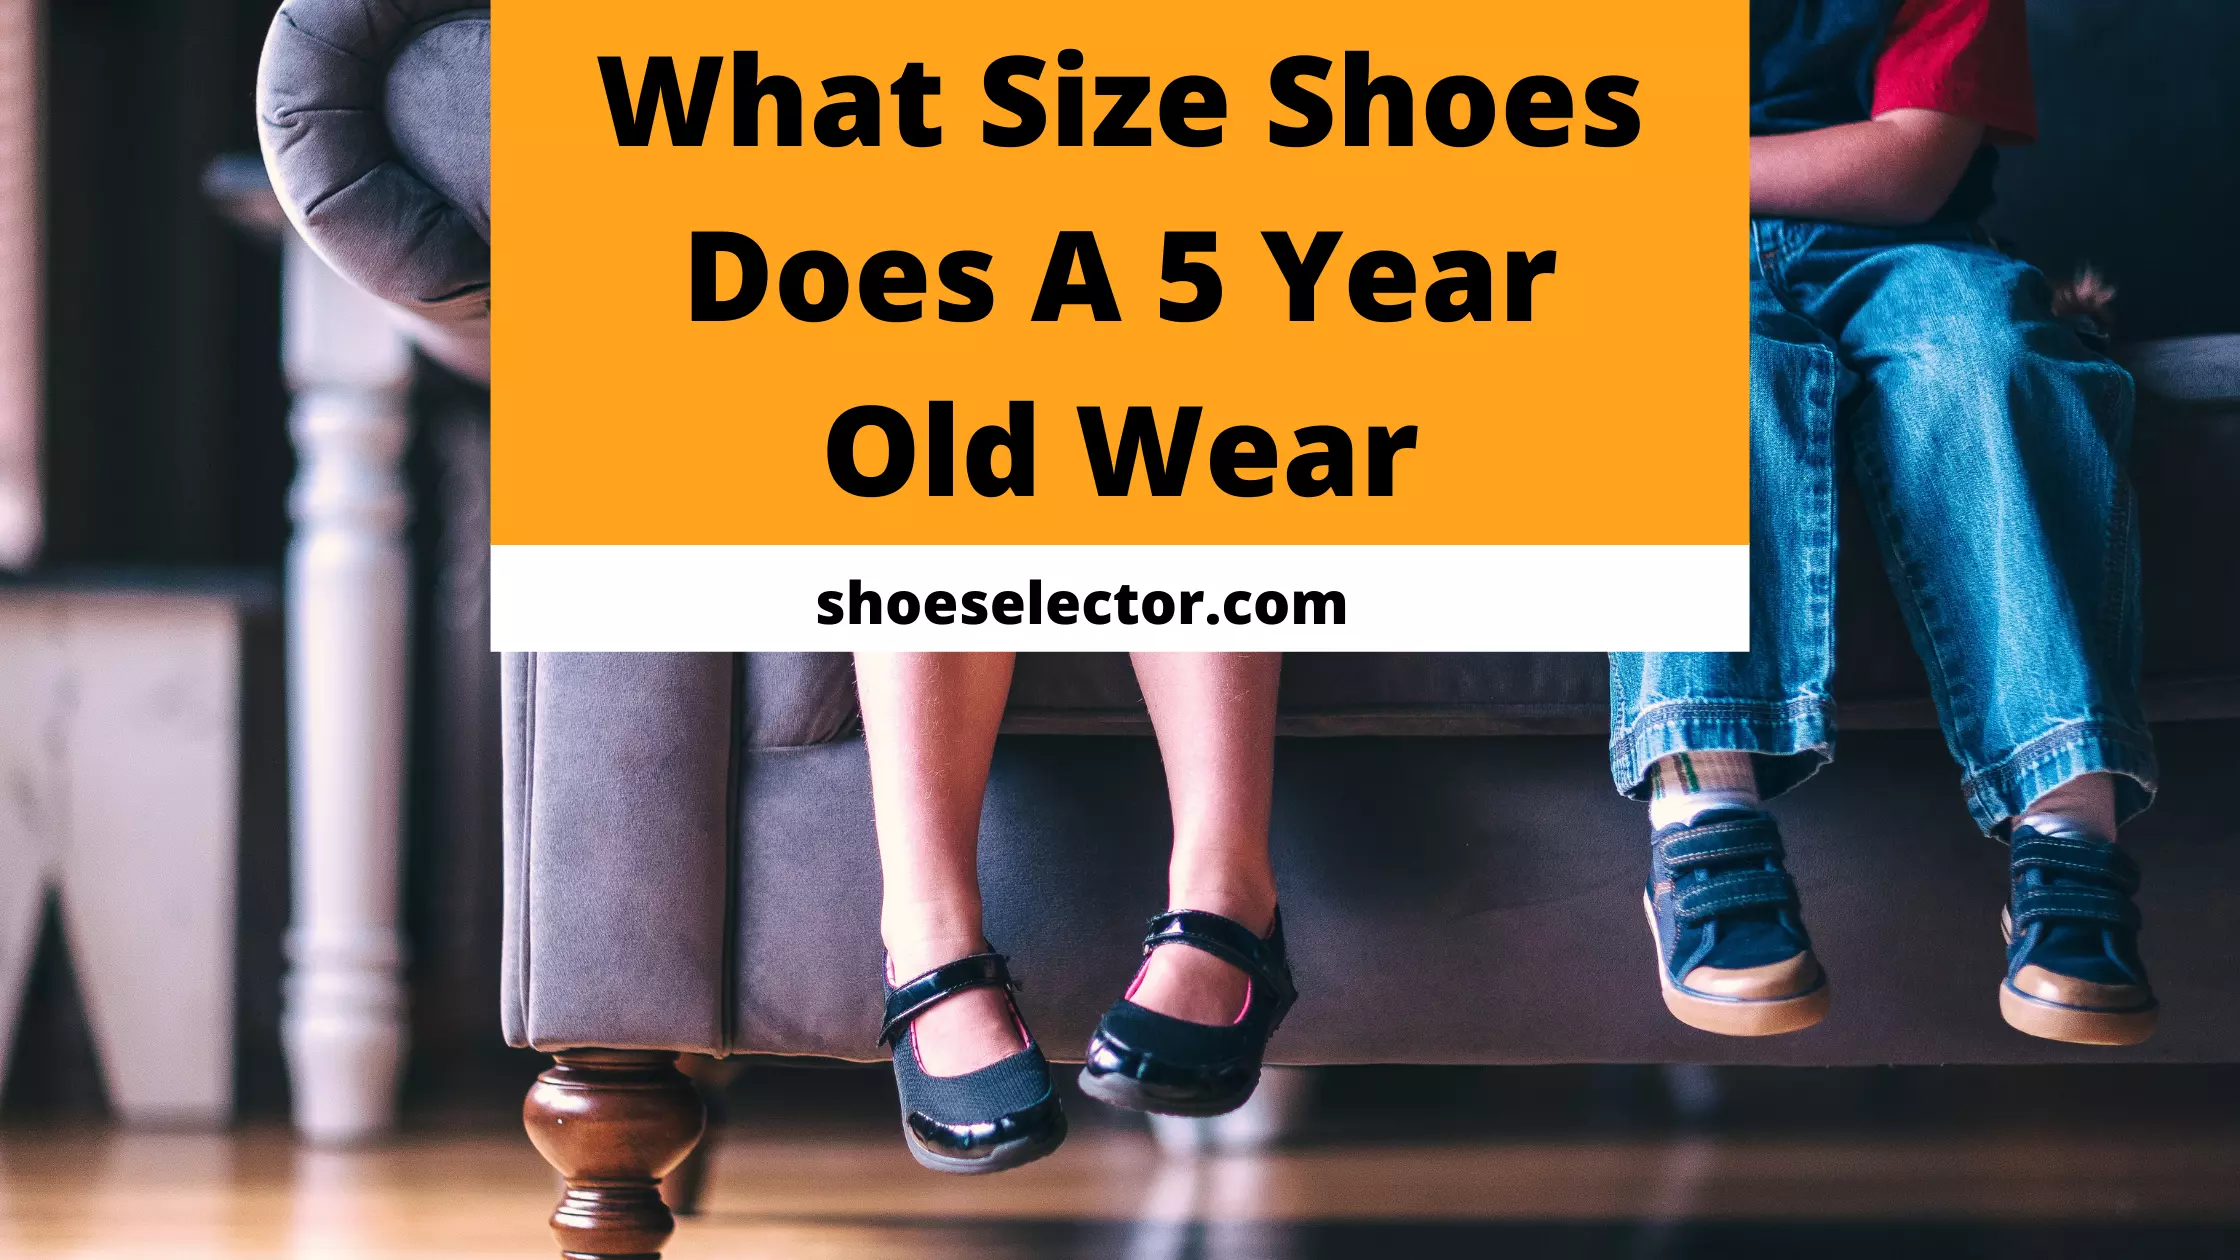 What Size Shoe Does a 5 Year Old Wear? - #1 Guide